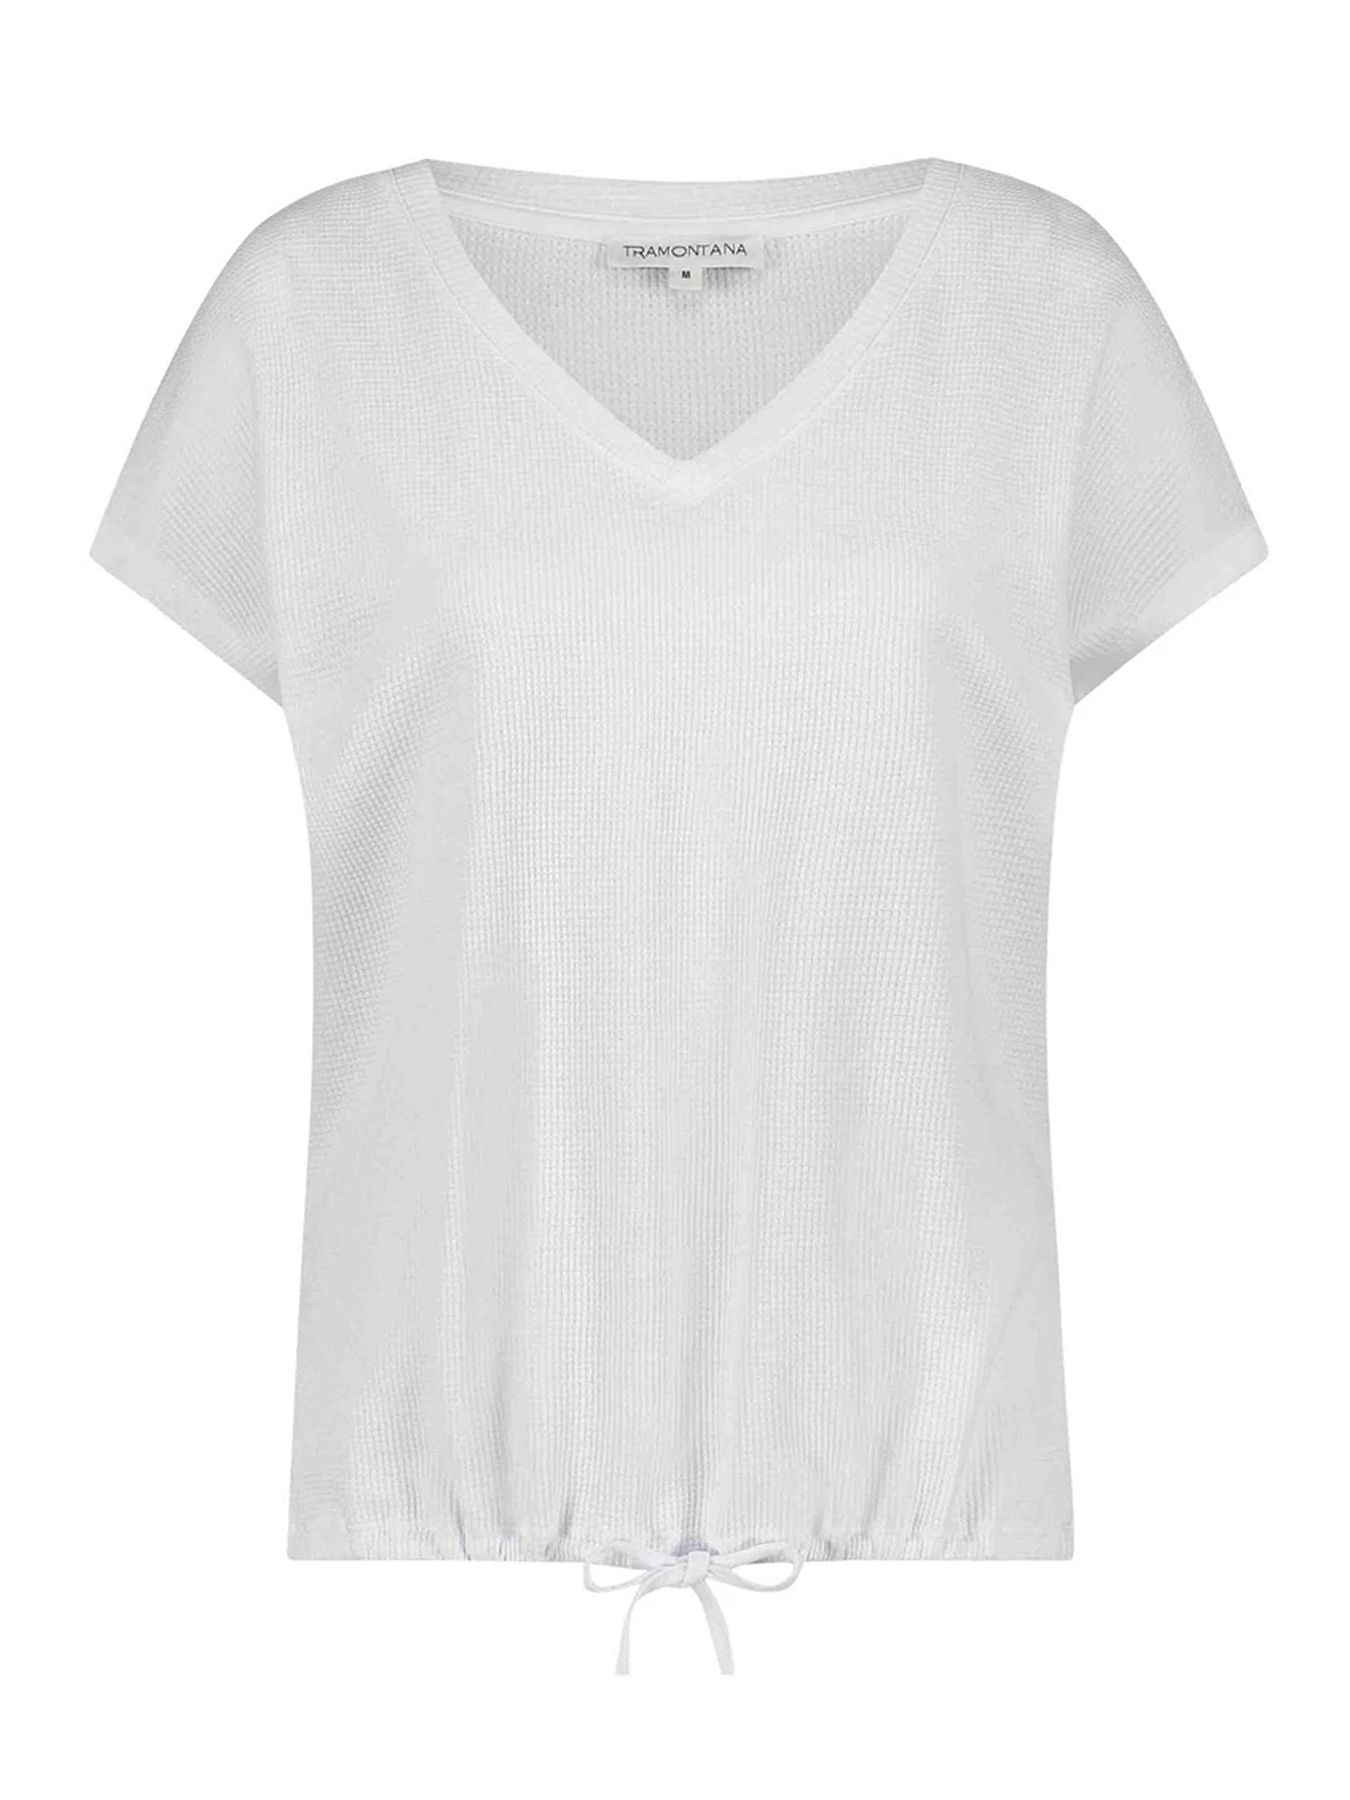 Tramontana Top S/S Structure White 001000 2900144203047